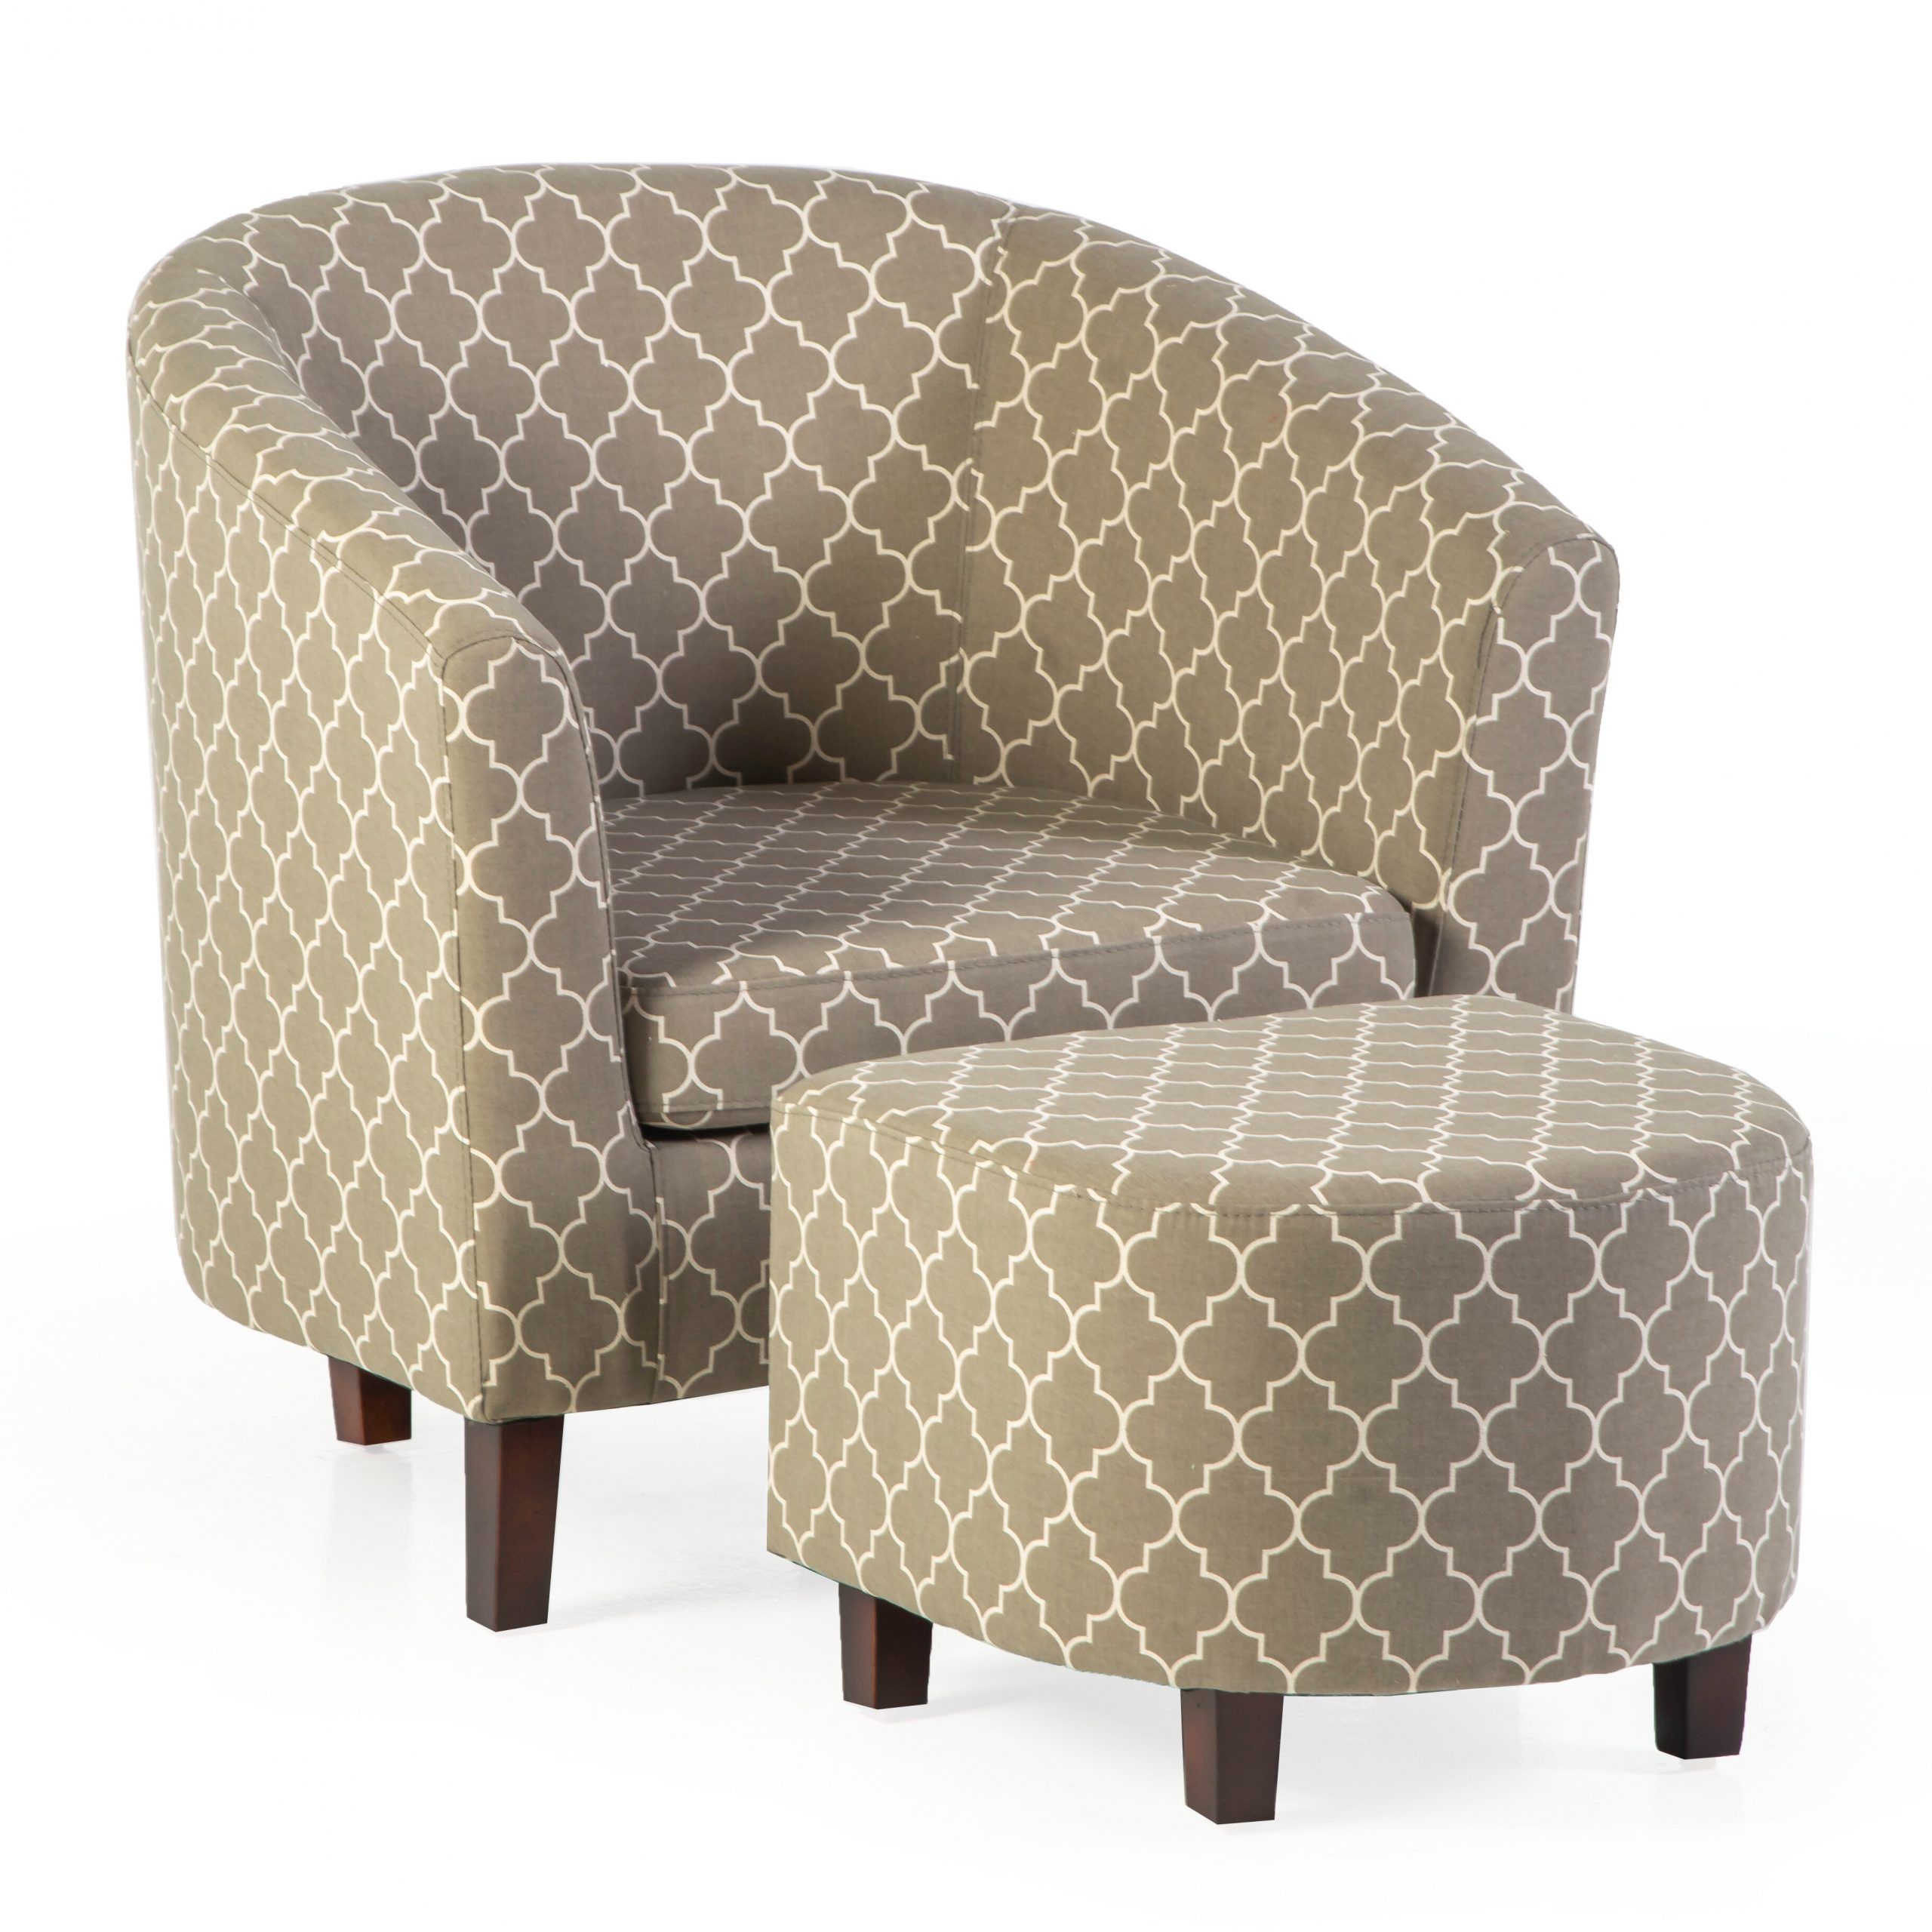 Artemi Barrel Chair And Ottoman Sets With Regard To Recent Artemi Barrel Chair And Ottoman (View 1 of 20)